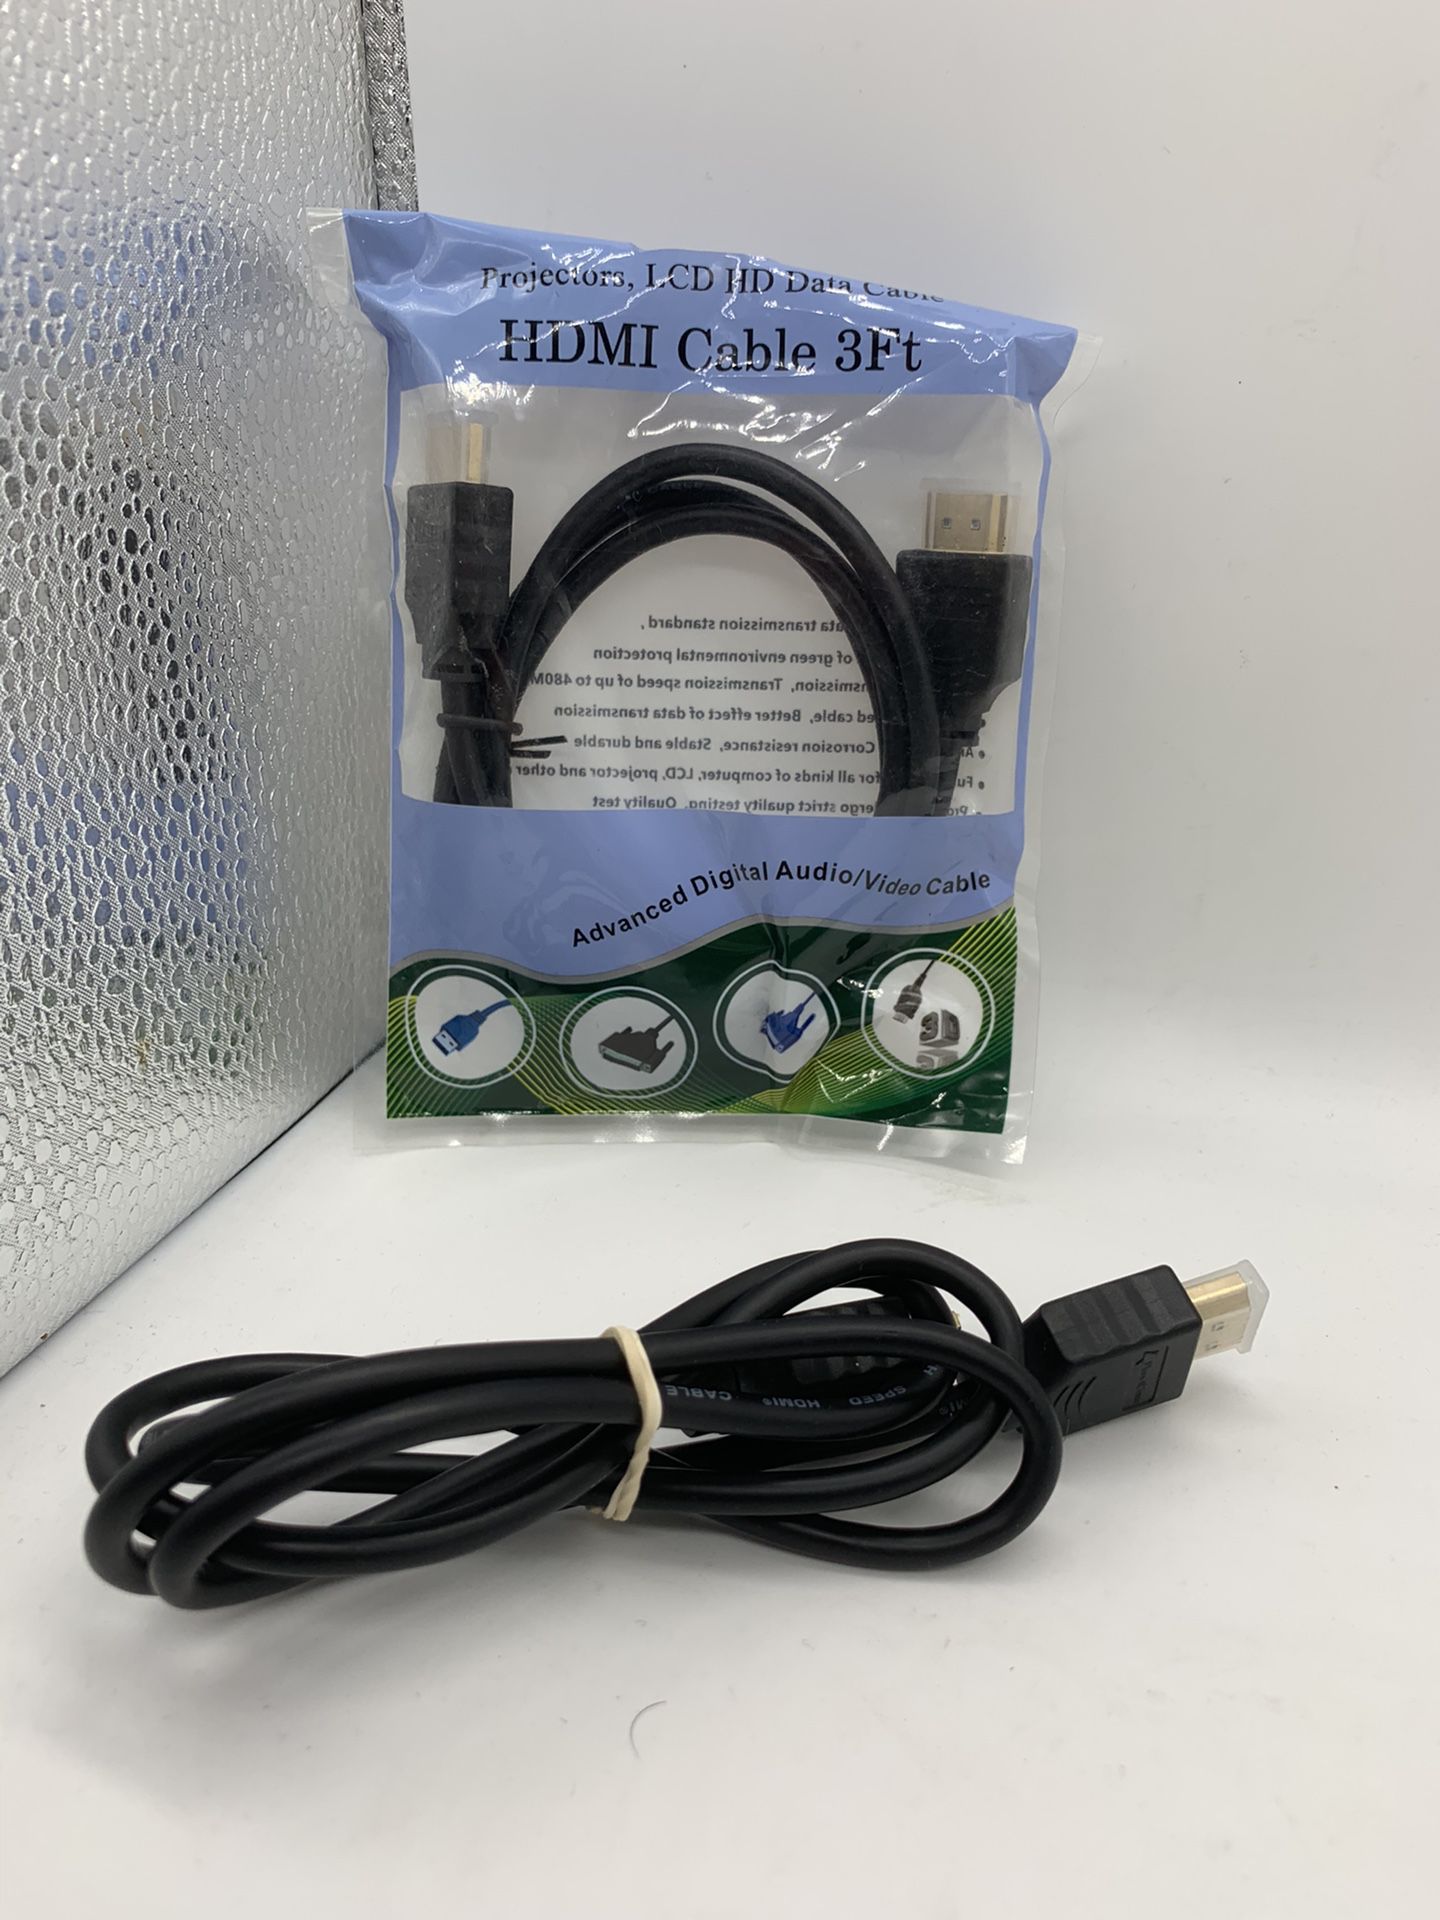 2 HDMI cable 3 ft new